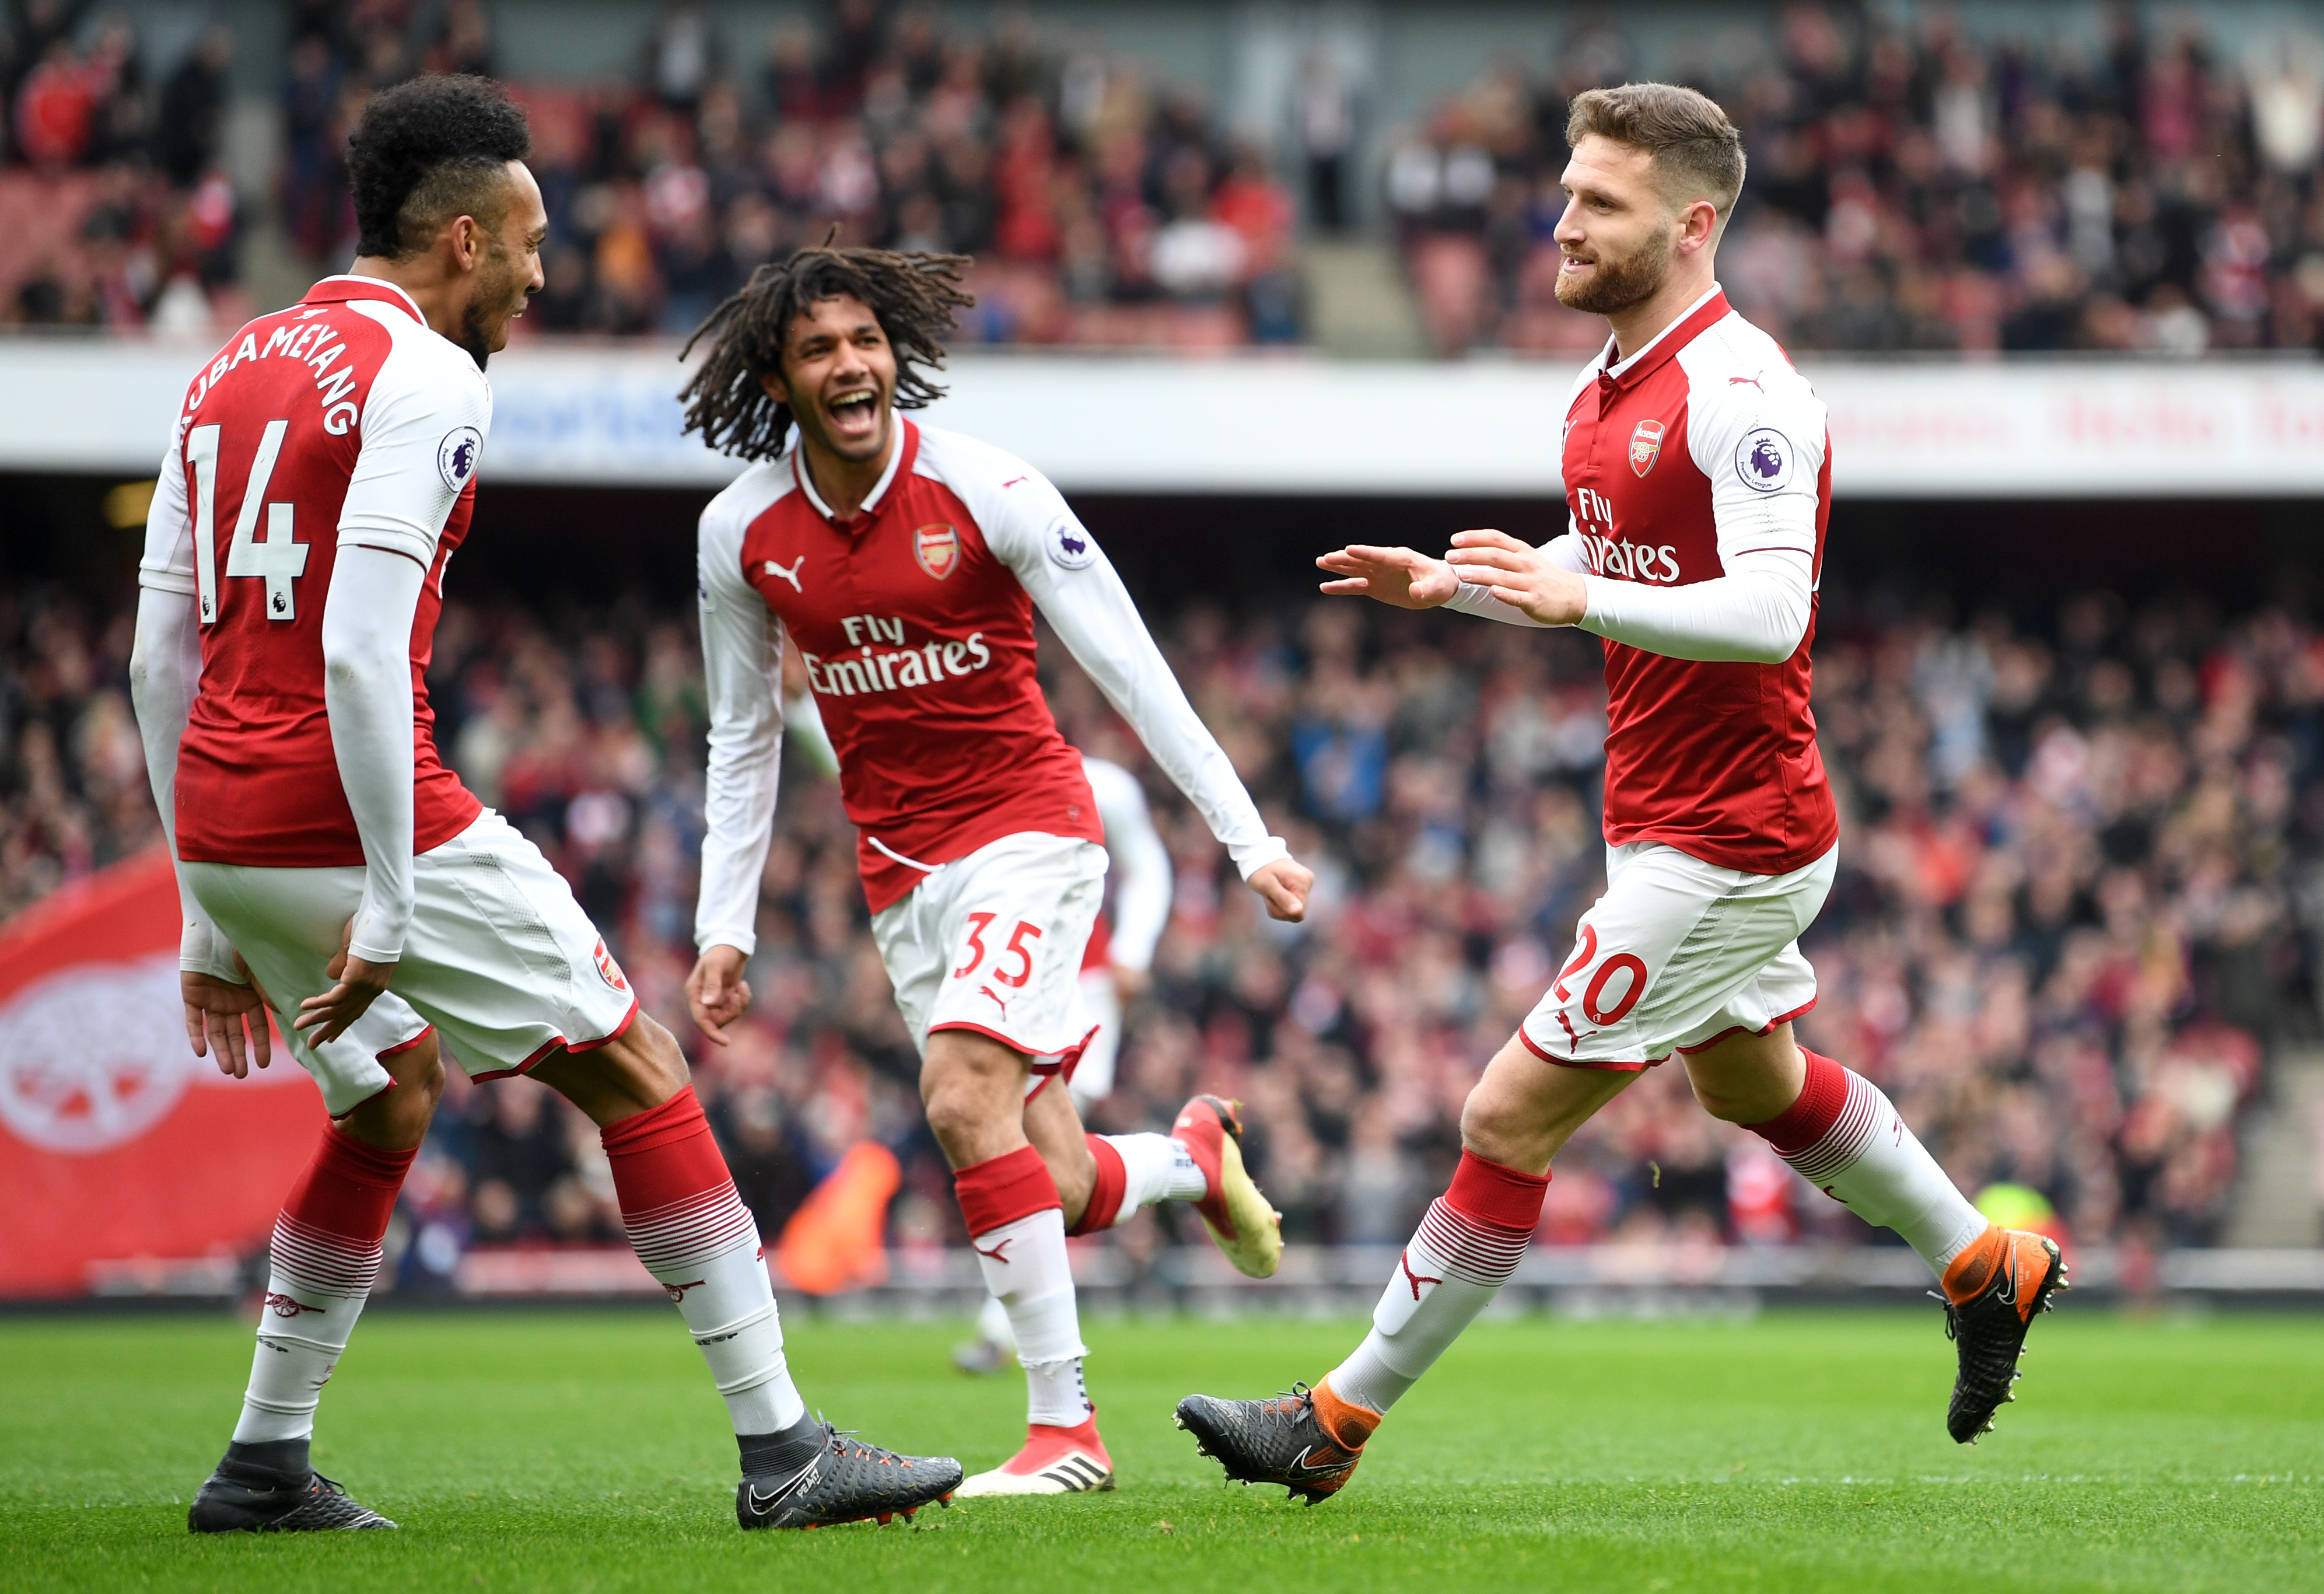 LONDON, ENGLAND - MARCH 11:  Shkodran Mustafi of Arsenal celebrates coring the first goal with Pierre-Emerick Aubameyang of Arsenal and Mohamed Elneny of Arsenal during the Premier League match between Arsenal and Watford at Emirates Stadium on March 11, 2018 in London, England.  (Photo by Michael Regan/Getty Images)